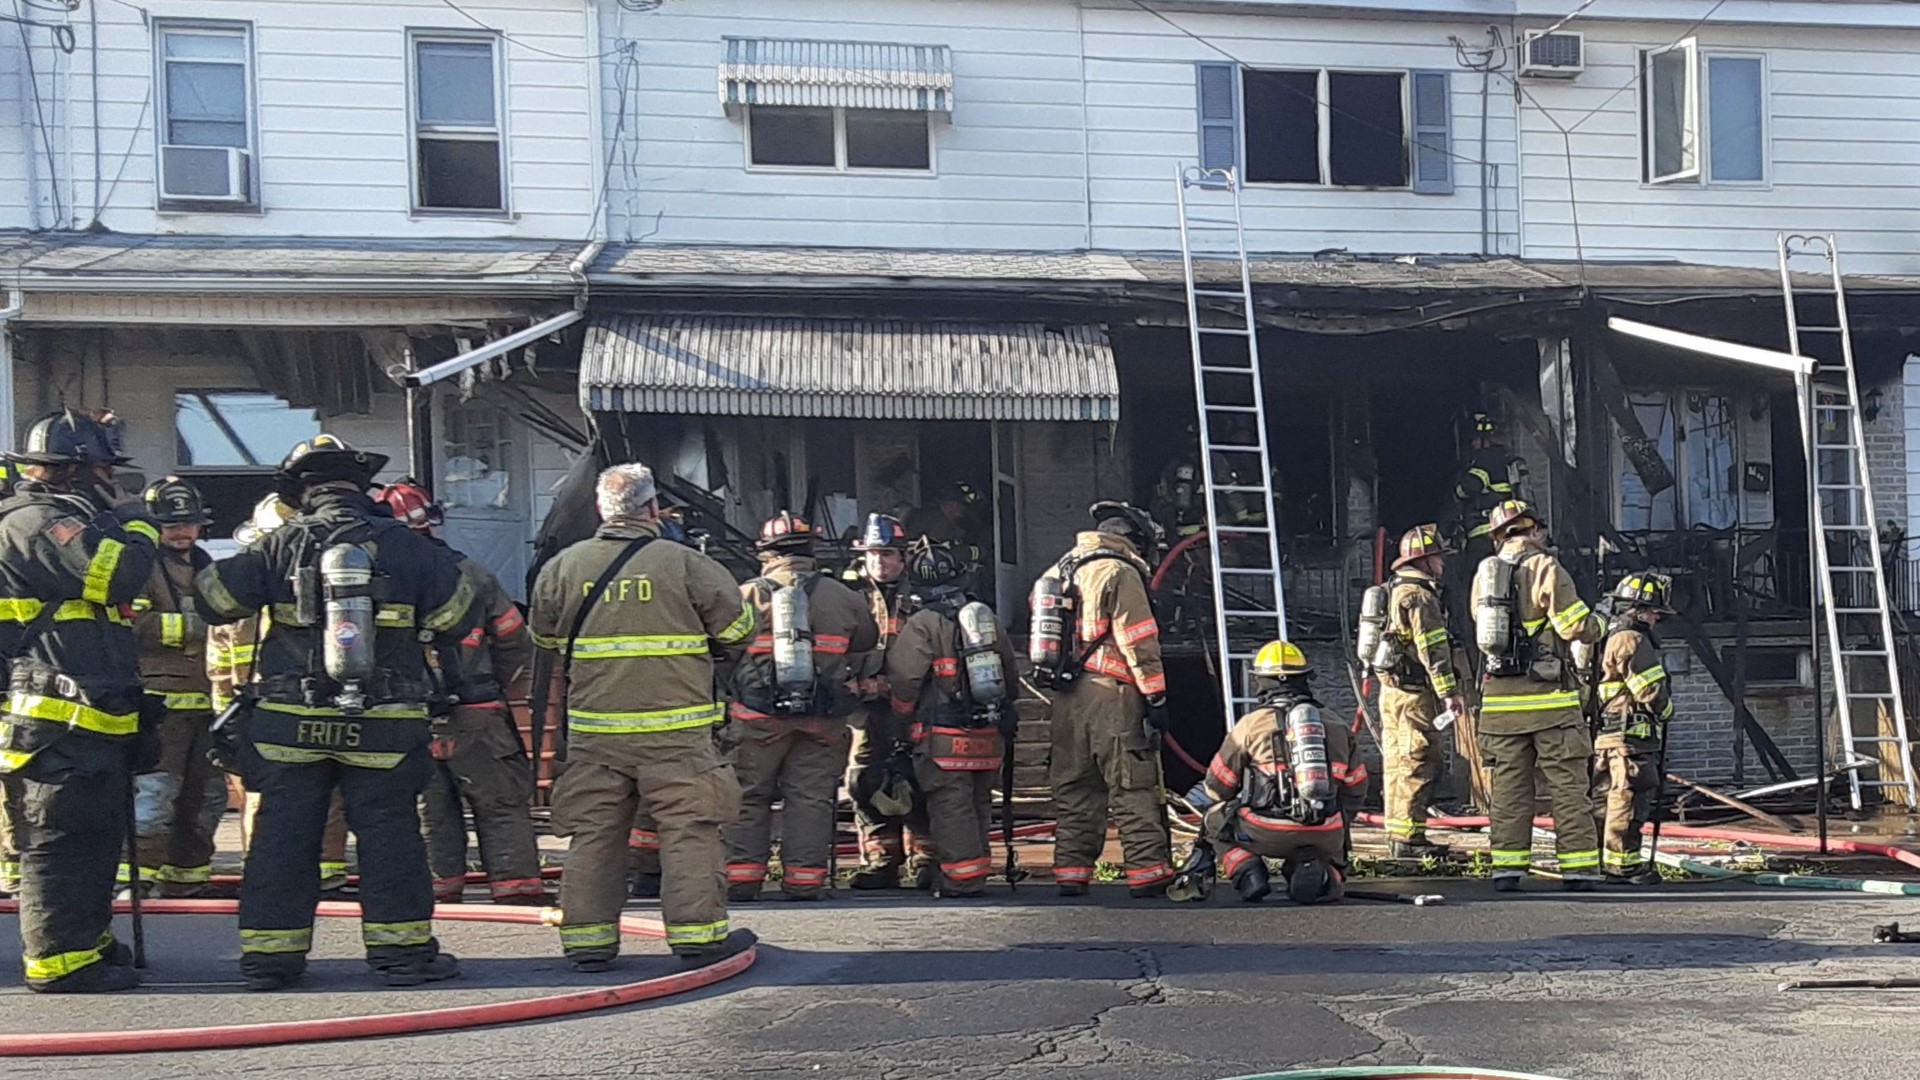 Crews were called to a fire that damaged several row homes just before 7am Thursday morning.